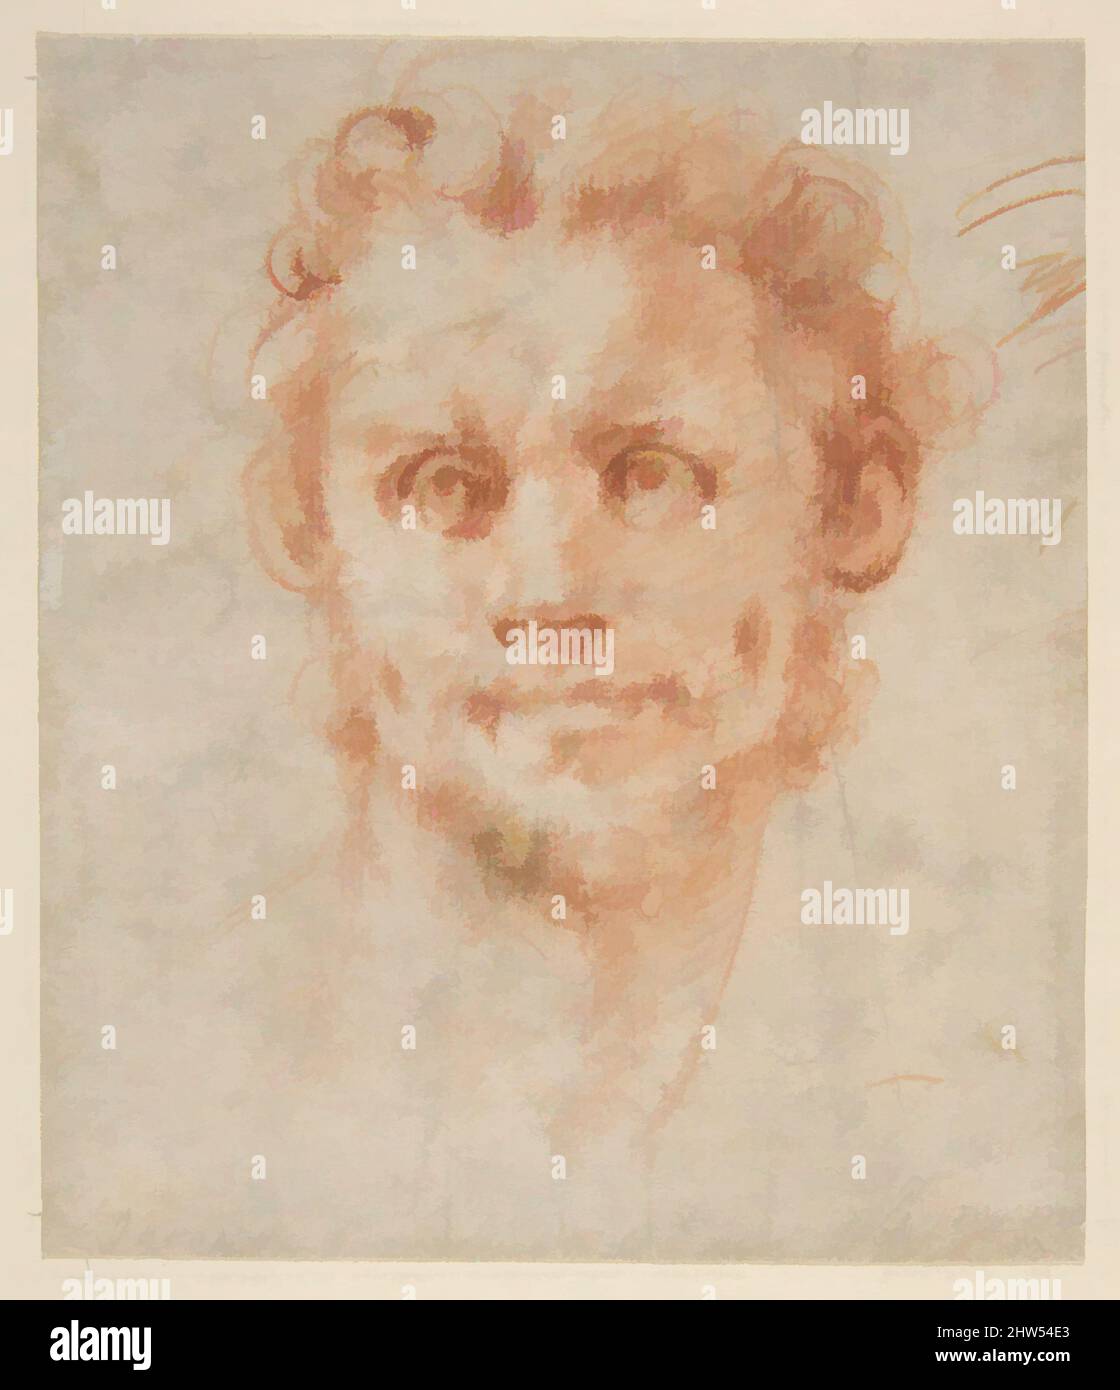 Art inspired by Study of a Man's Head, 1494–1556, Red chalk; stumping, sheet: 5 1/4 x 4 1/2 in. (13.3 x 11.4 cm), Drawings, Jacopo da Pontormo (Jacopo Carucci) (Italian, Pontormo 1494–1556 Florence, Classic works modernized by Artotop with a splash of modernity. Shapes, color and value, eye-catching visual impact on art. Emotions through freedom of artworks in a contemporary way. A timeless message pursuing a wildly creative new direction. Artists turning to the digital medium and creating the Artotop NFT Stock Photo